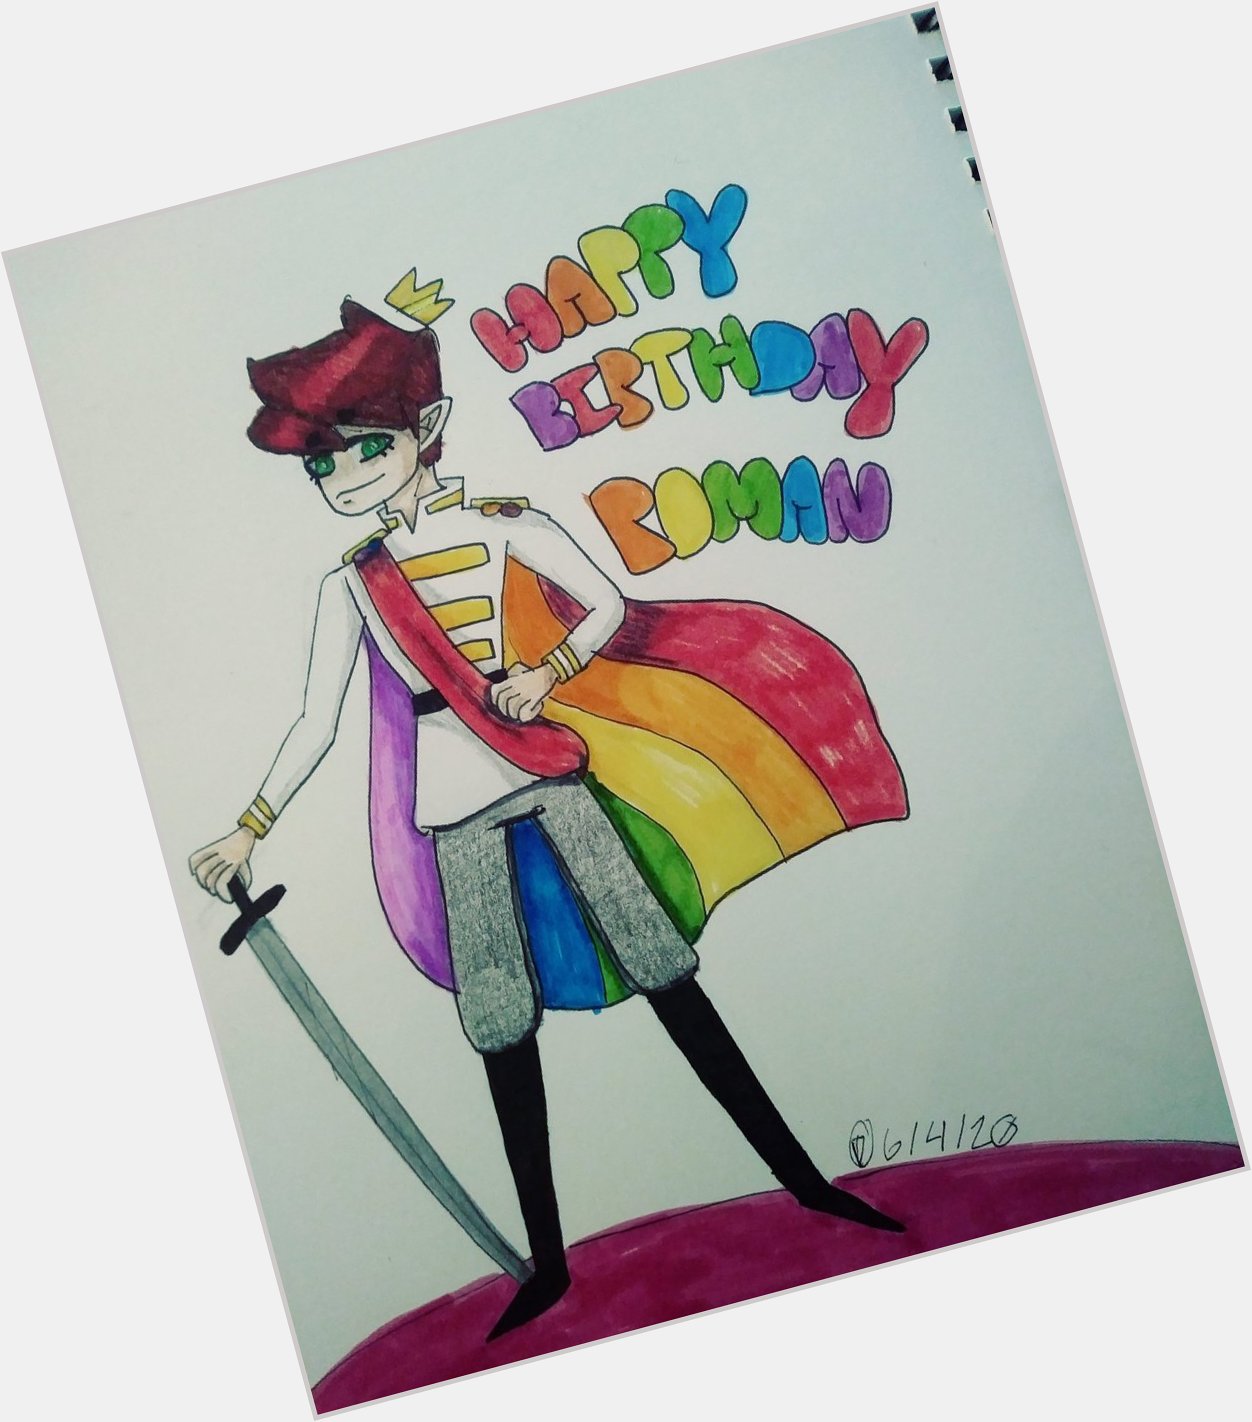 Happy birthday to our Gay Disney Prince, Roman. And I hope you like the picture. 